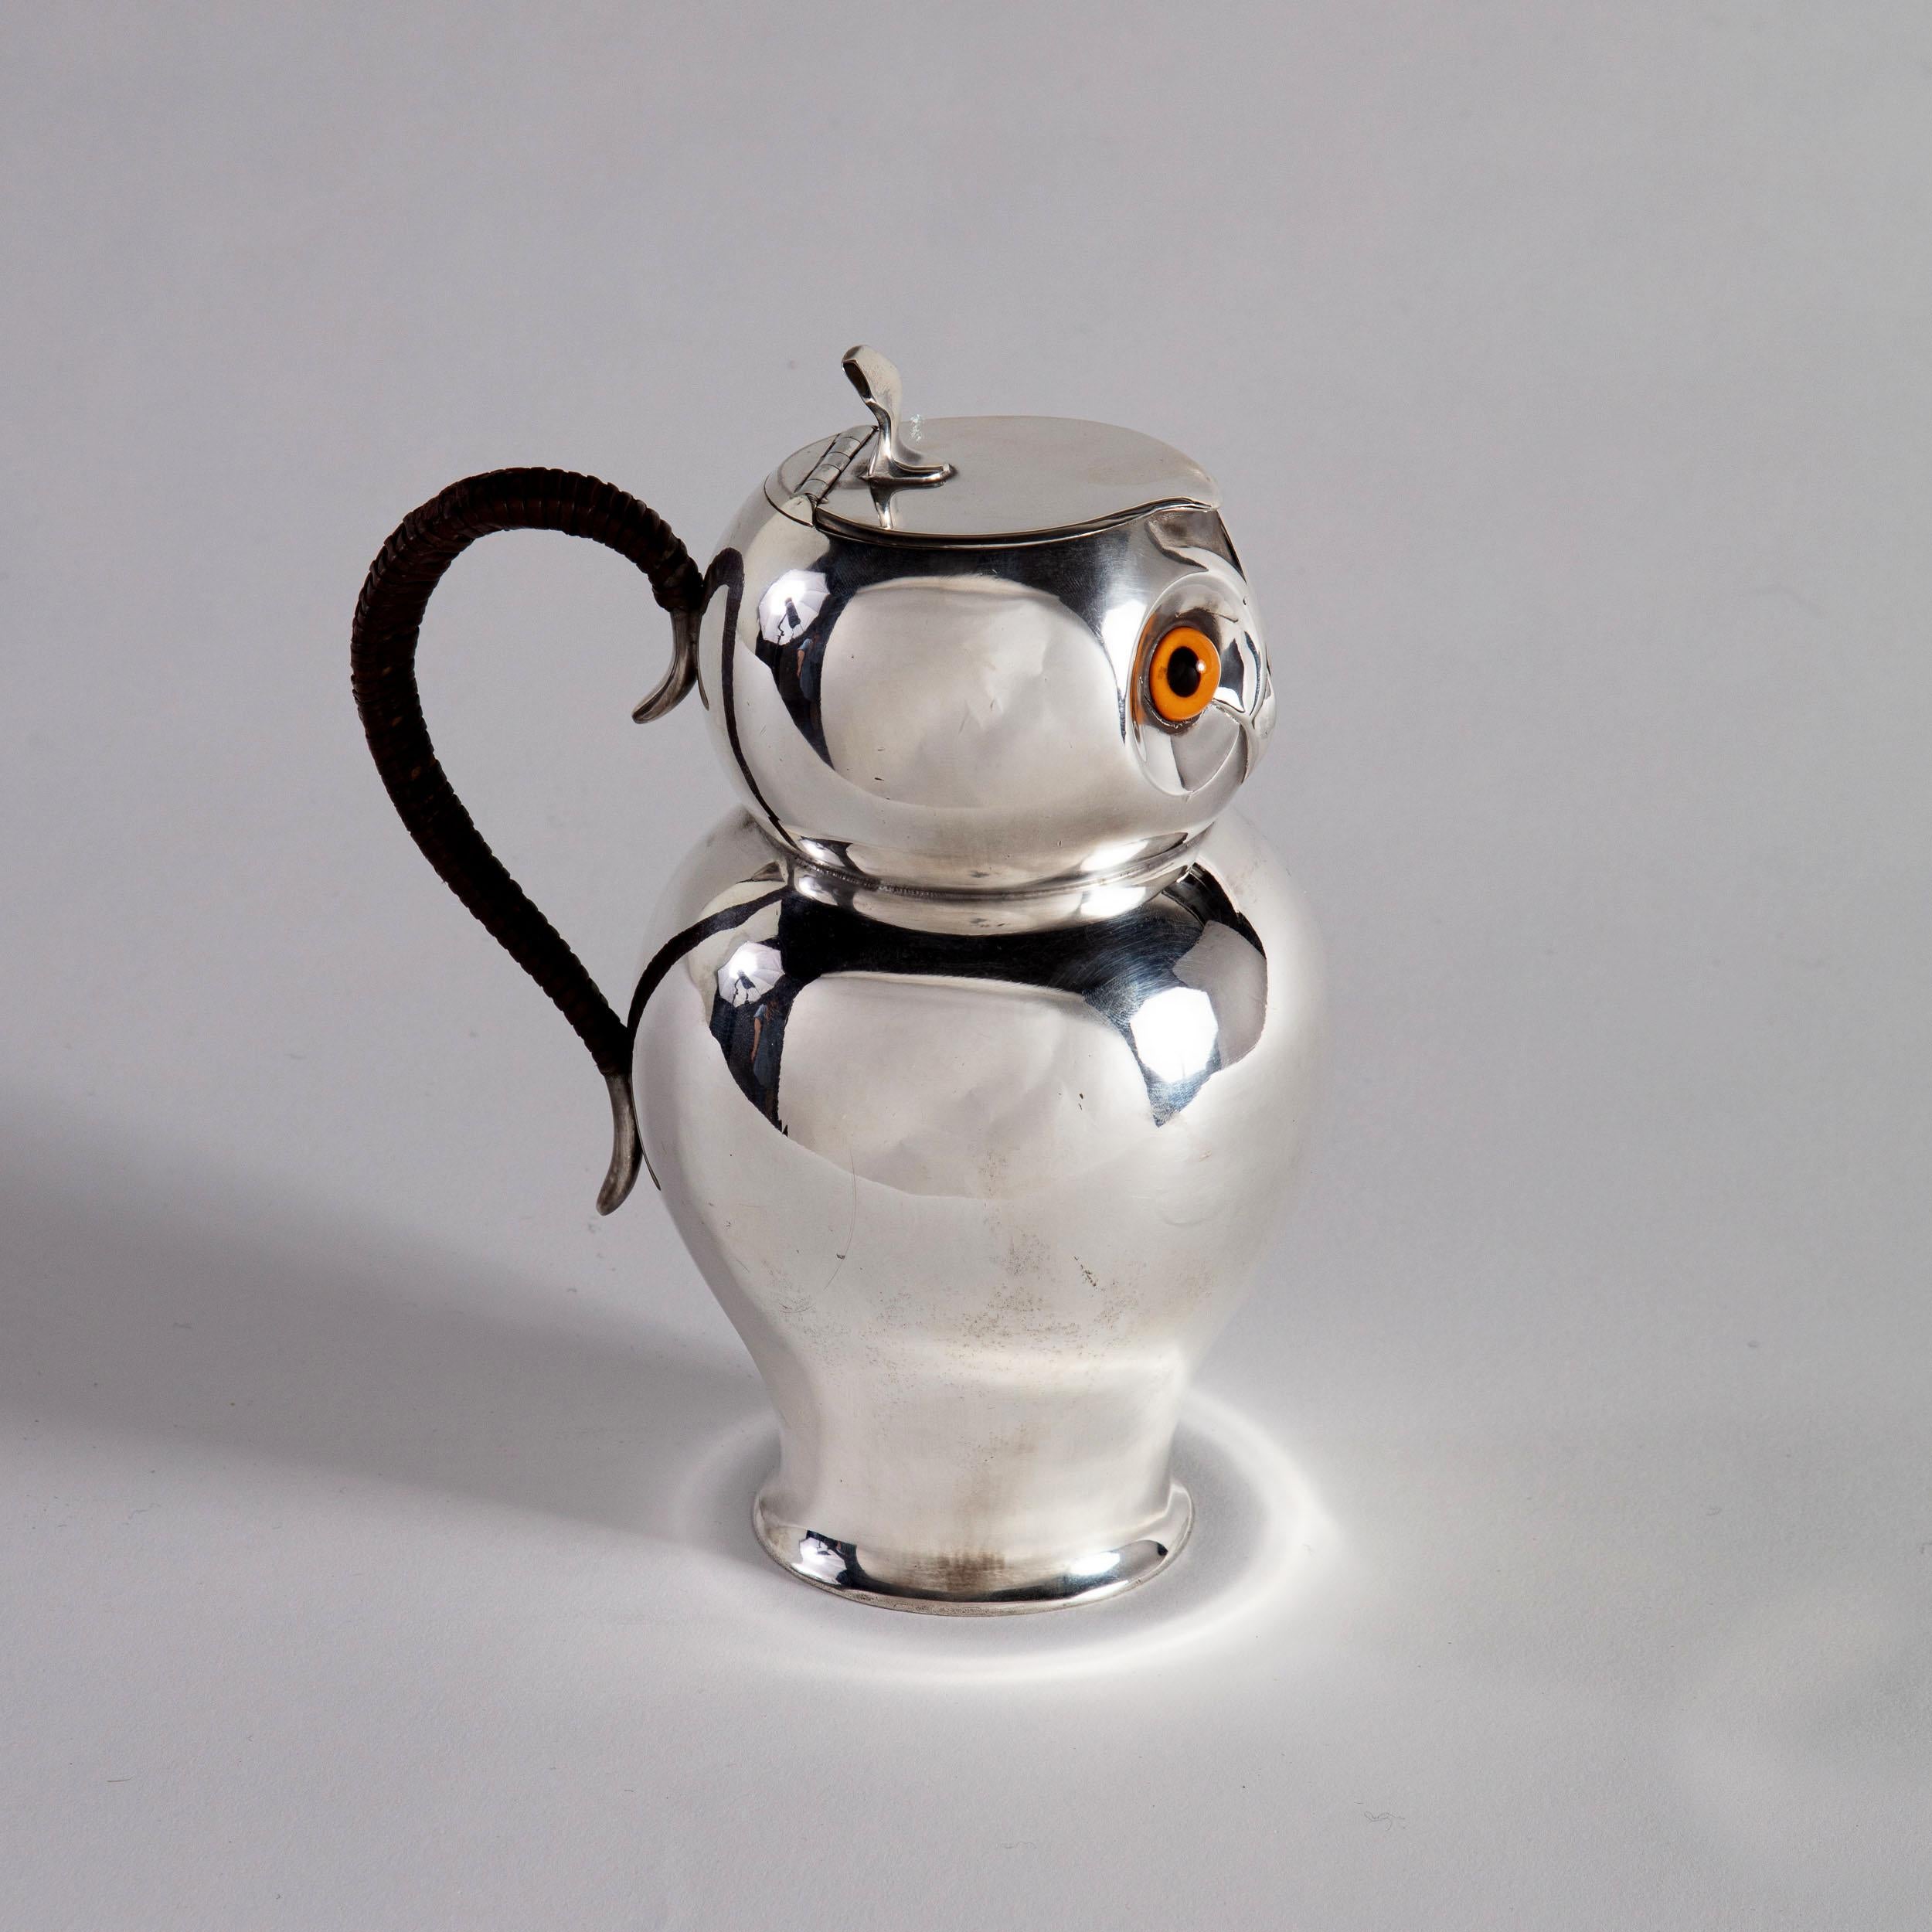 A rare late 19th century silver plated hot chocolate pot in the form of an owl, with the original glass eyes and brown wicker handle.
Stamped to the base with makers mark: Crestwick & Co, Sheffield, circa 1880.
Made for the retailers HJ LINTON, 30